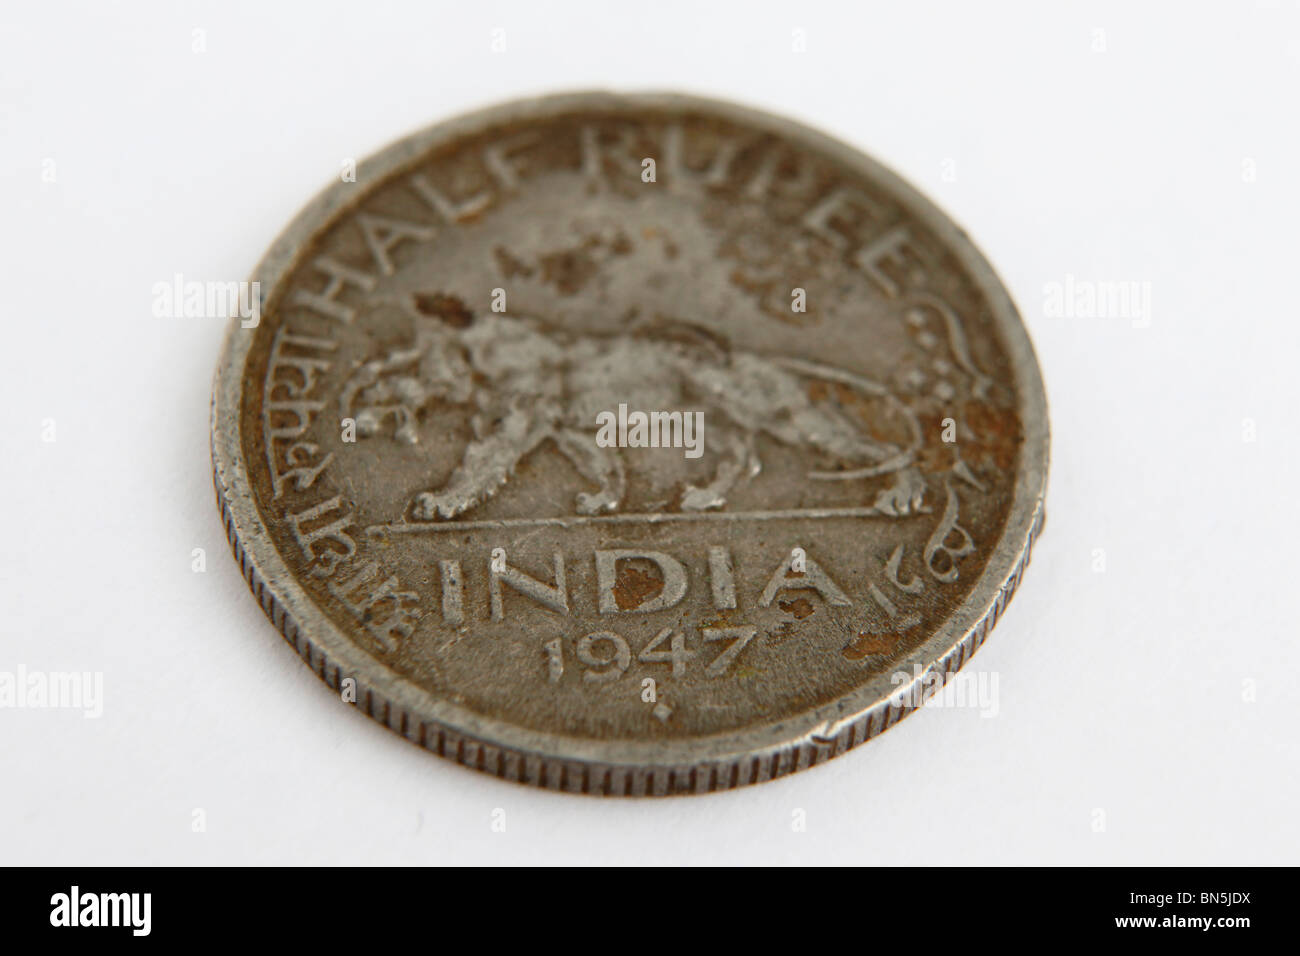 A half rupee Indian coin dates to 1947, the year of Indian Independence. Stock Photo